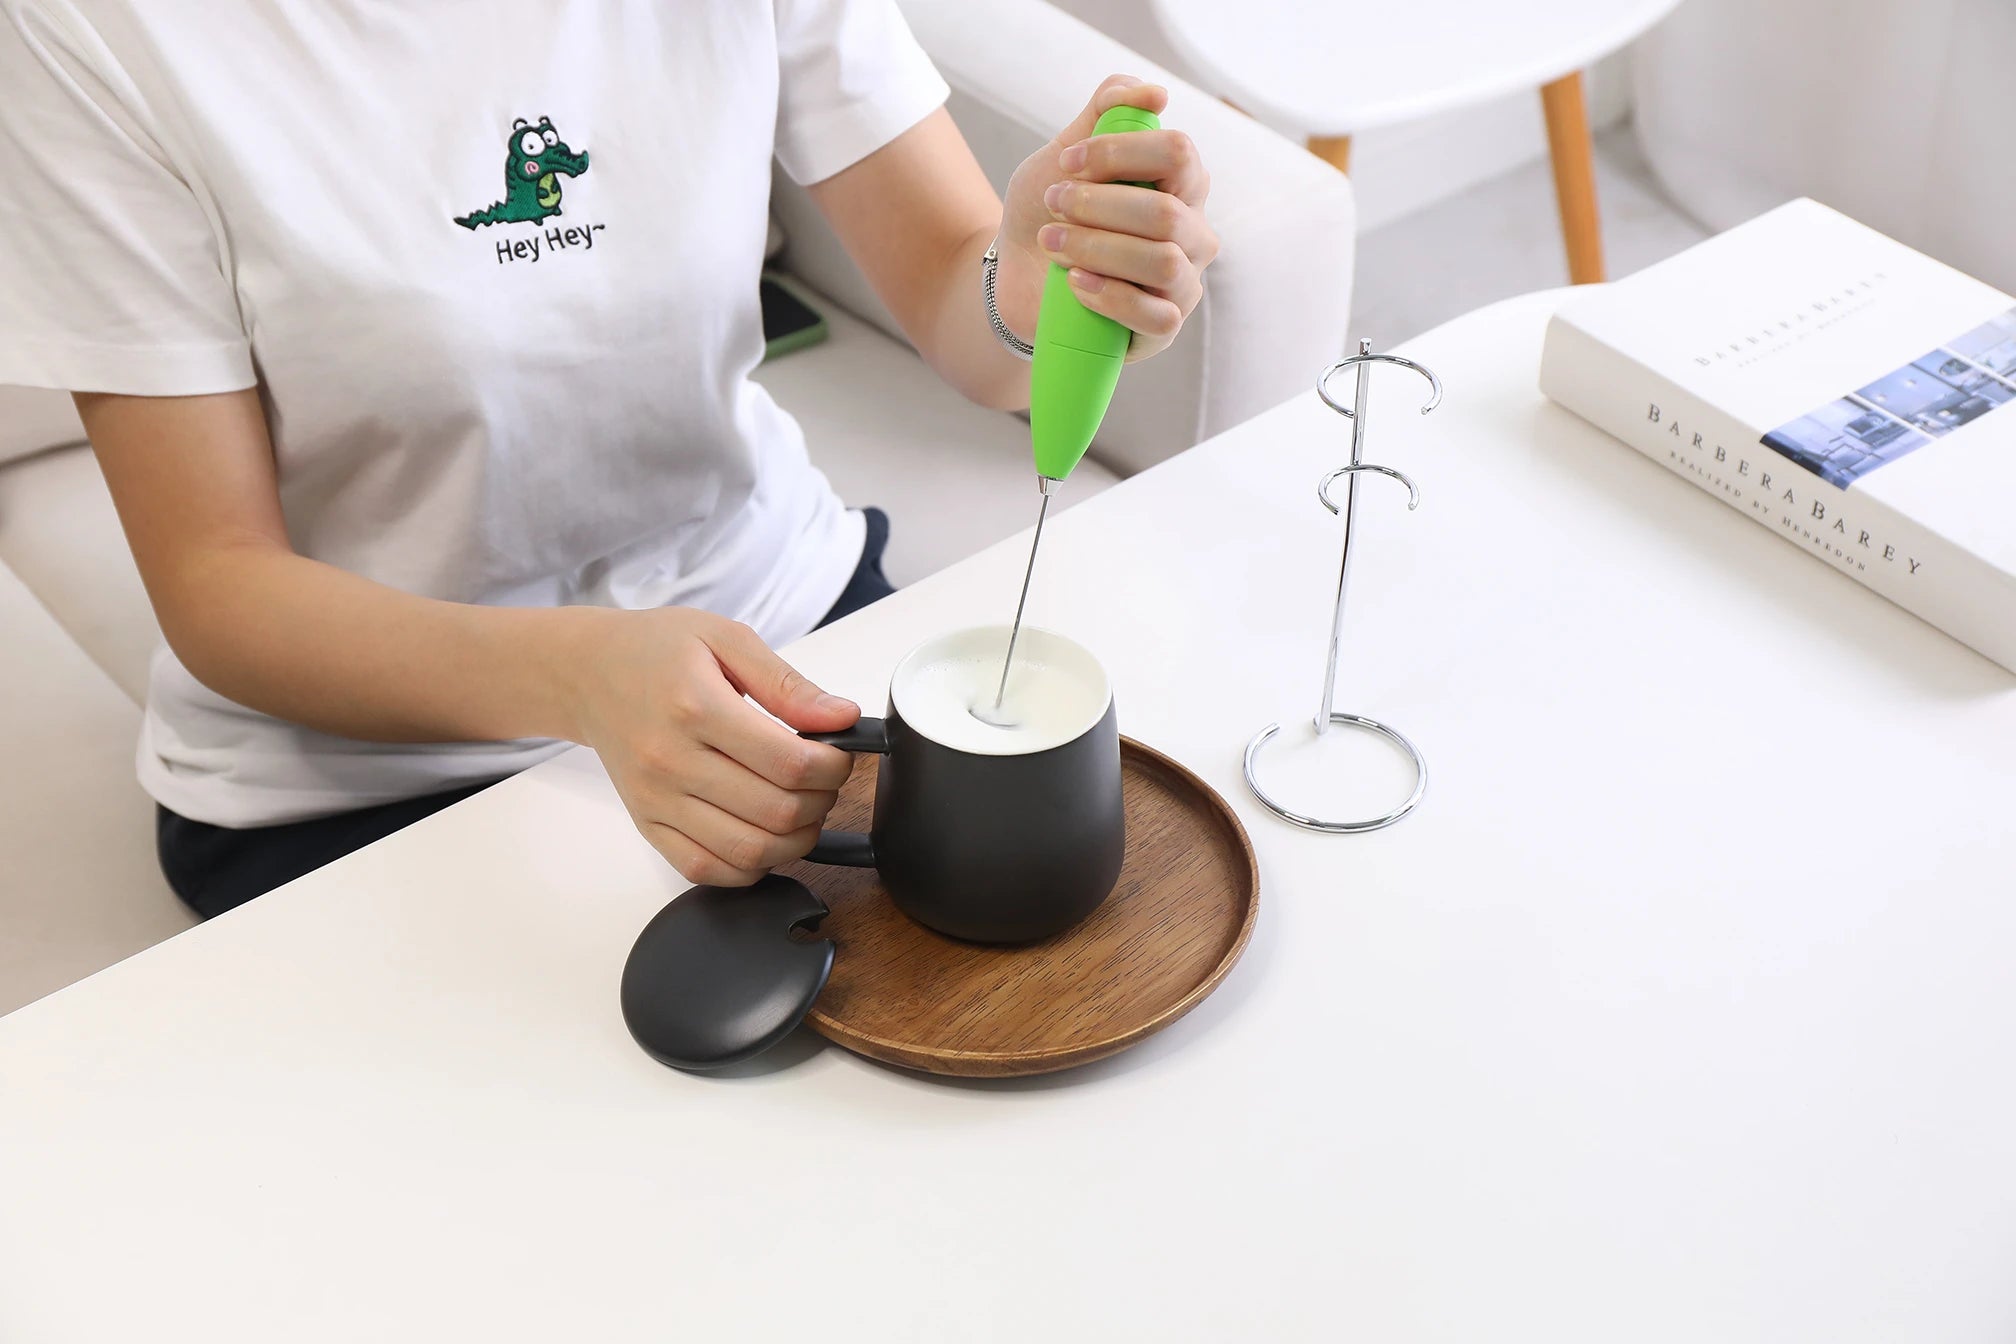 https://cdn.shopify.com/s/files/1/0330/5917/6493/files/Matcha_Electric_Whisk_and_Stand_Stainless_Steel_Scoop_and_Sifter1.webp?v=1657848489